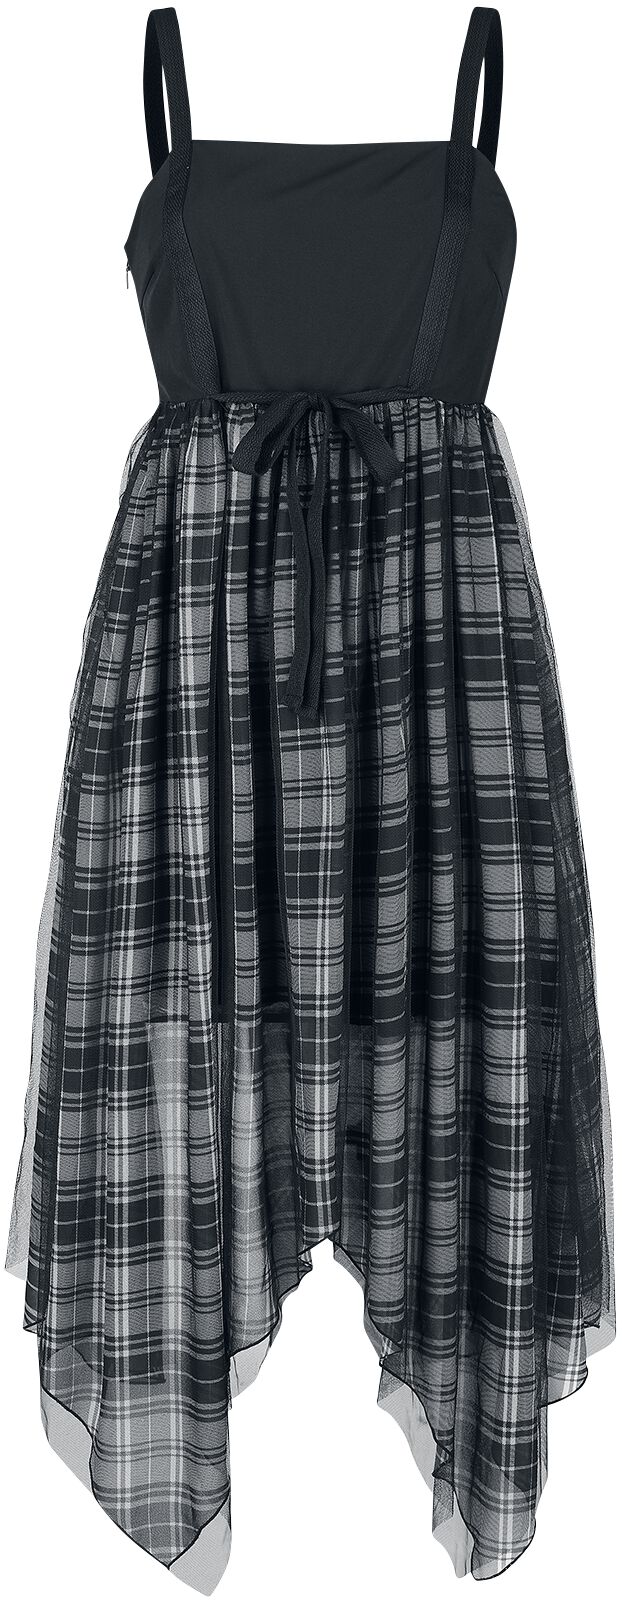 Image of Abito lungo di Rock Rebel by EMP - Dress with plaid tapered skirt - S - Donna - nero/grigio